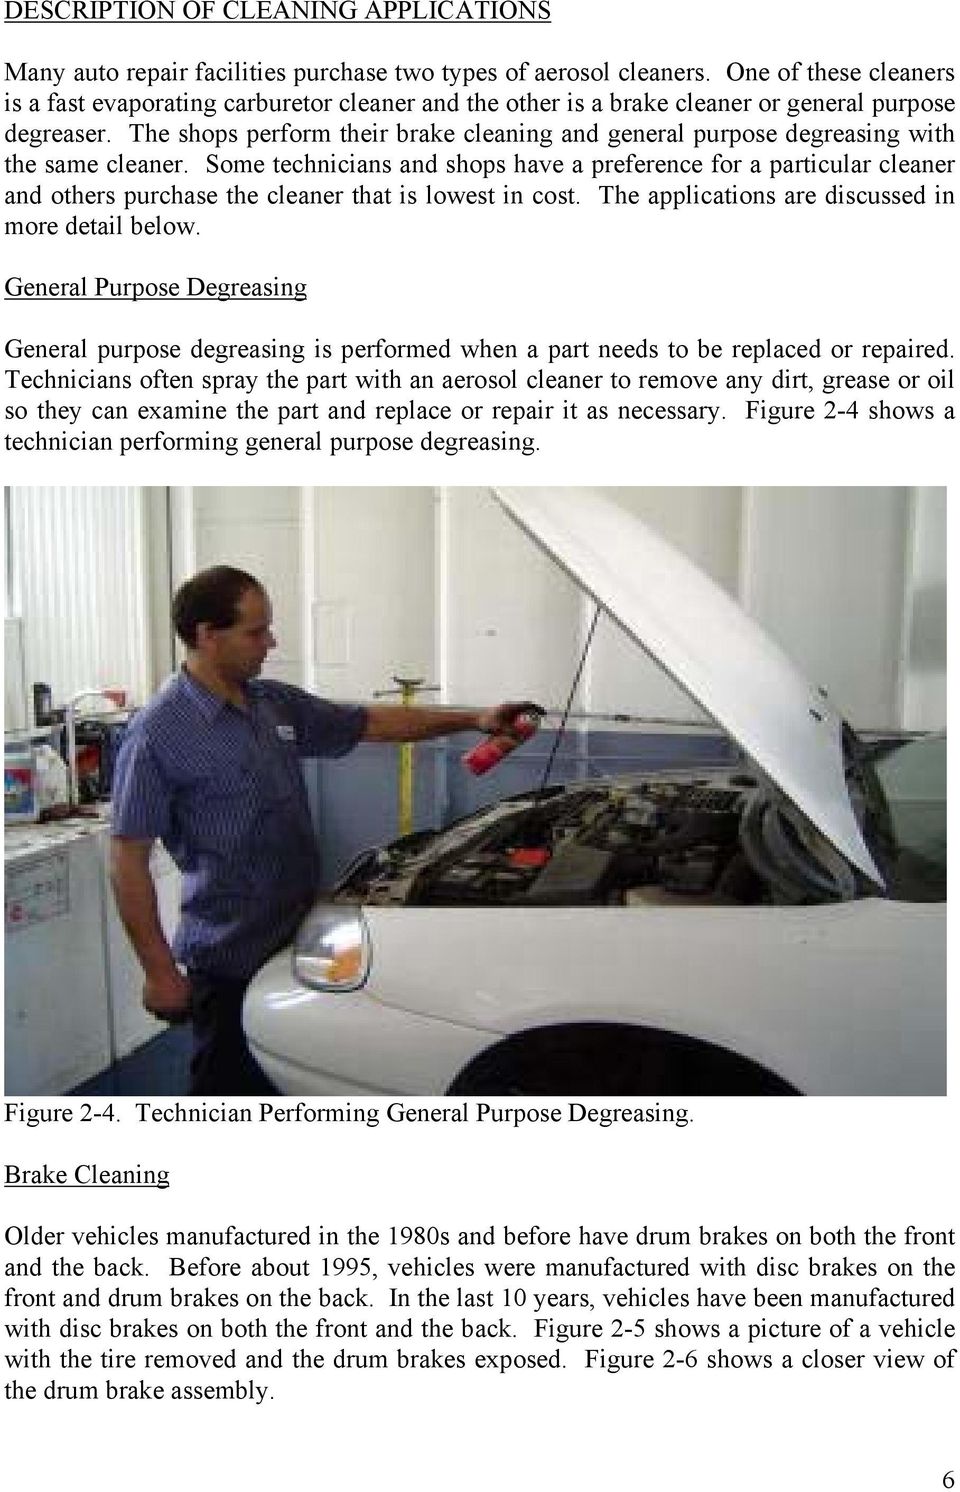 The shops perform their brake cleaning and general purpose degreasing with the same cleaner.